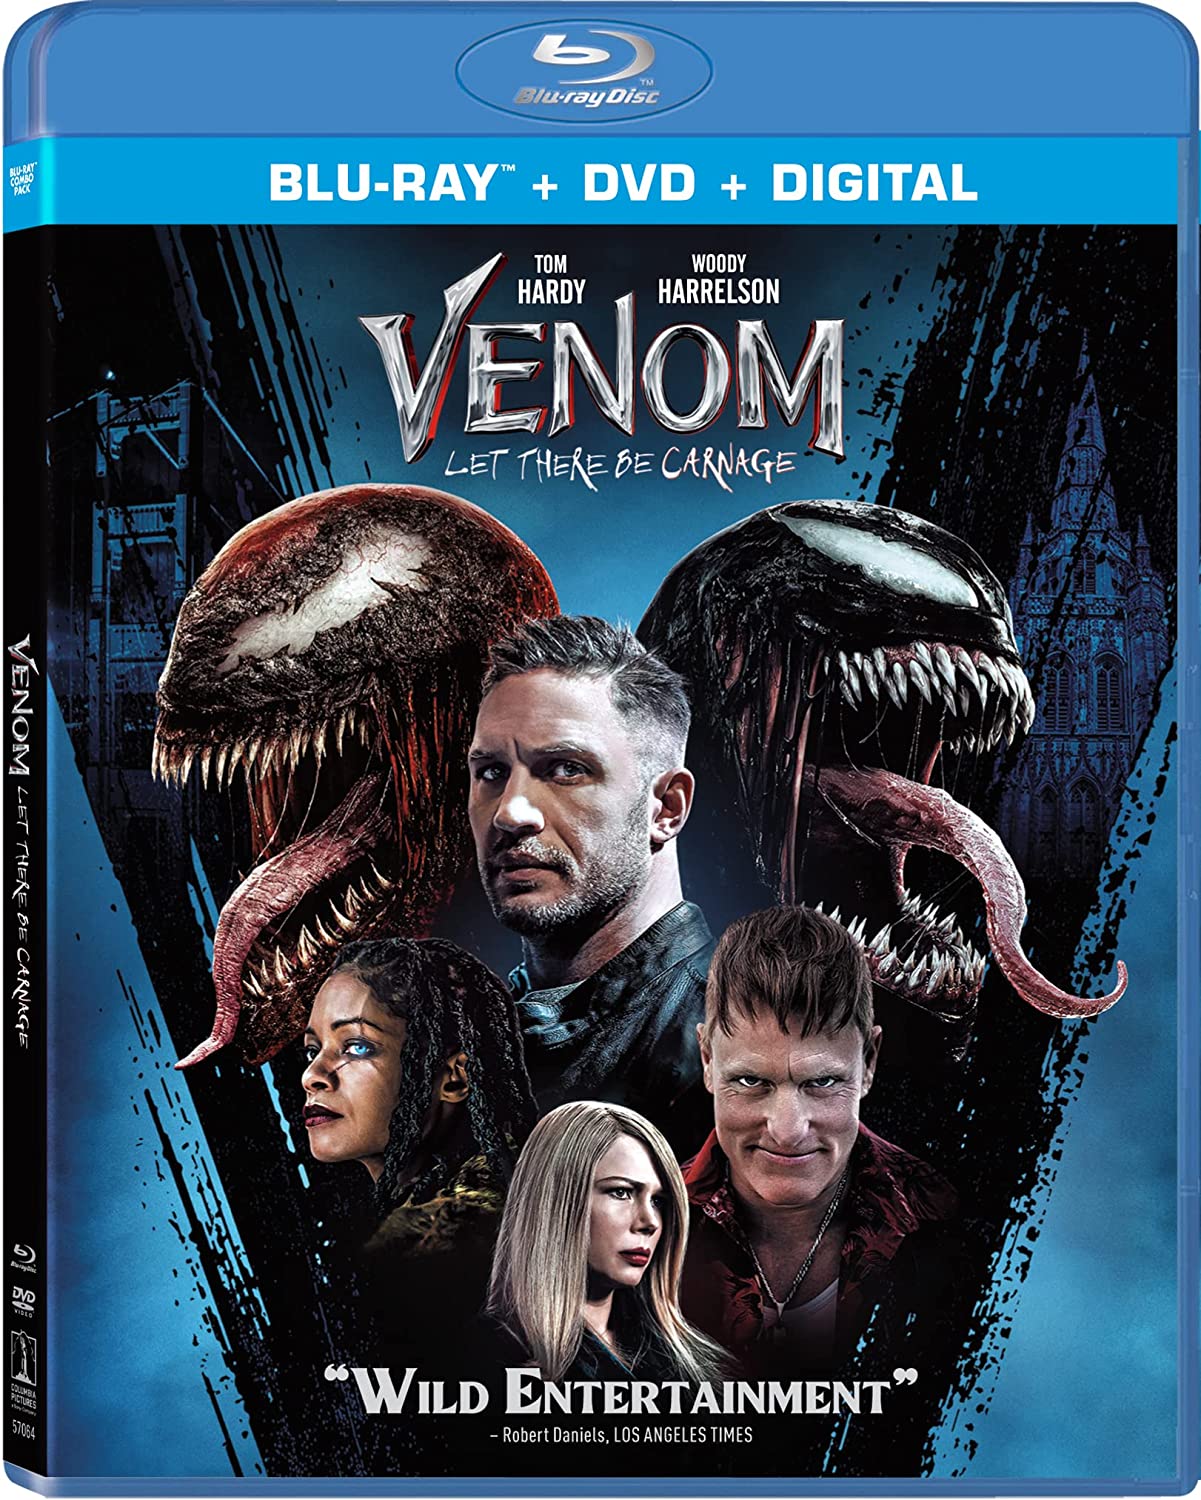 Venom- Let There Be Carnage Blu-ray